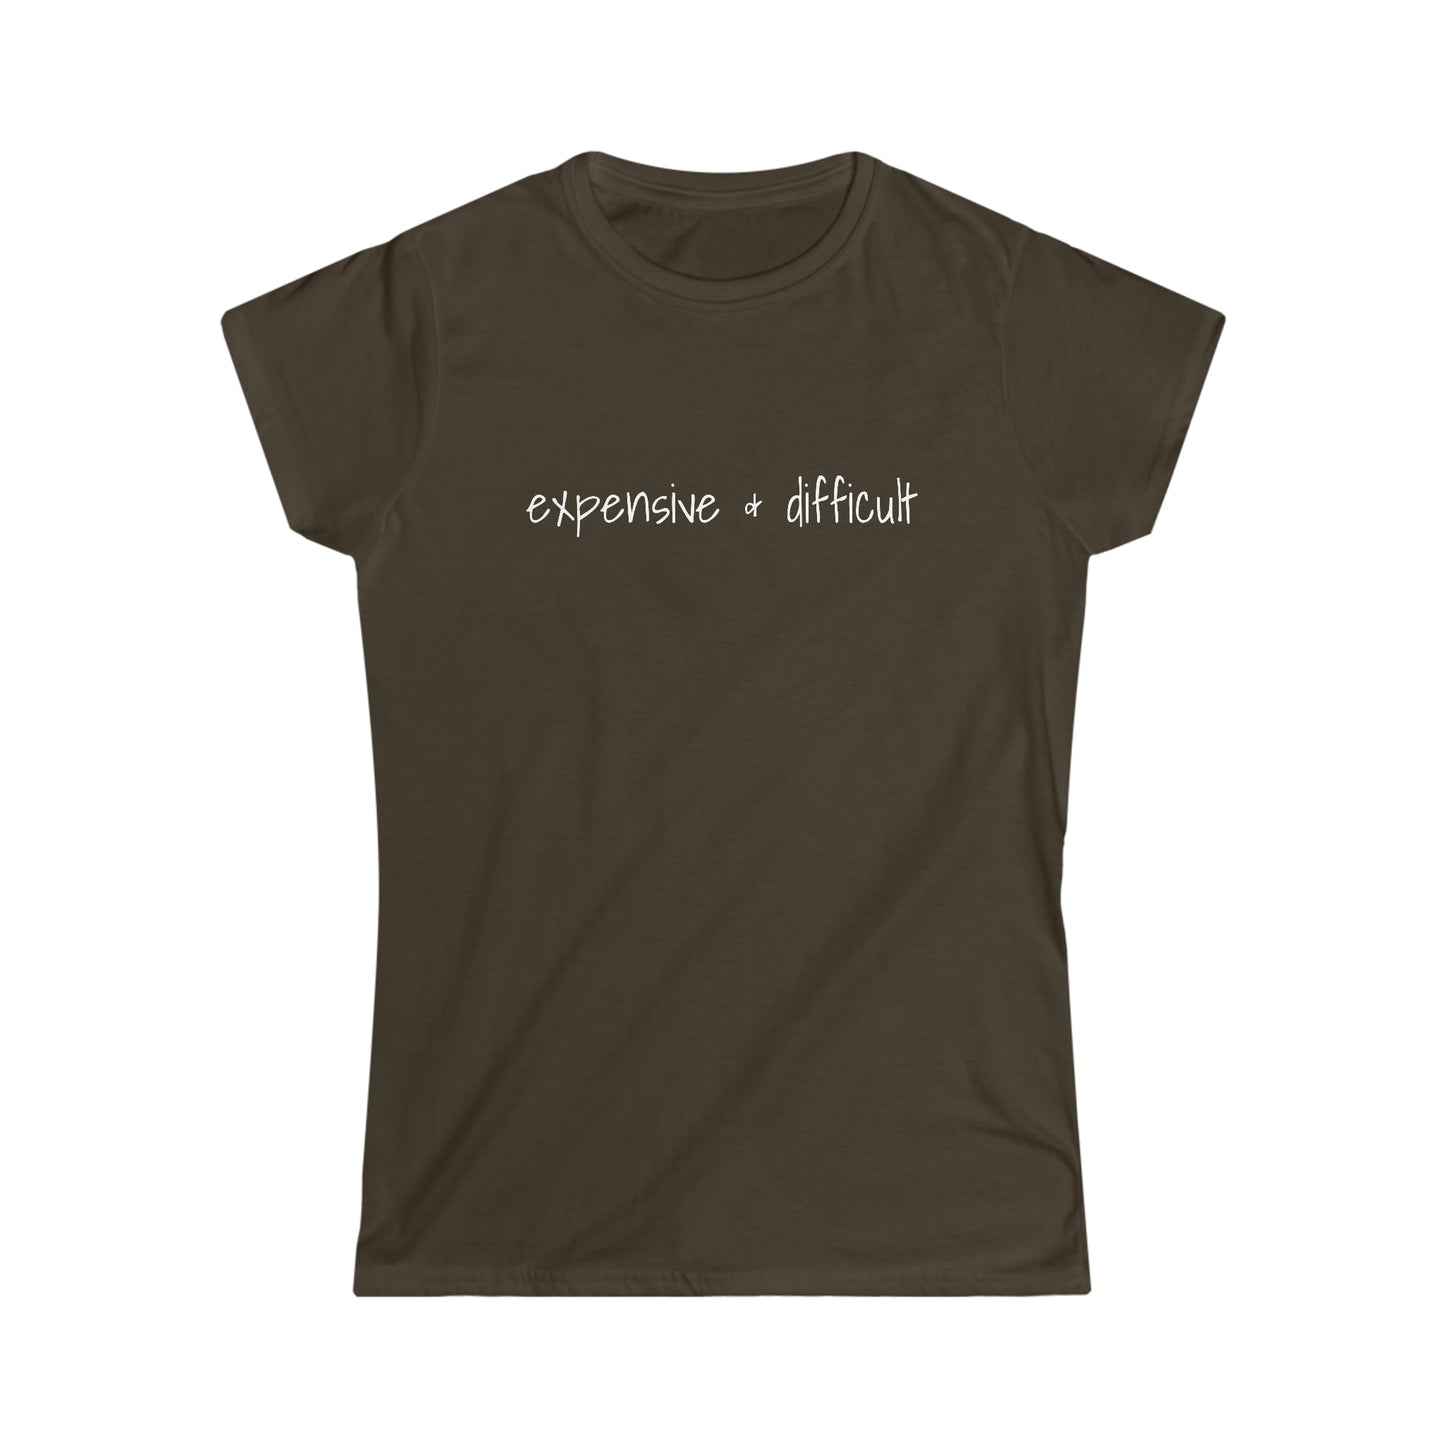 Expensive & Difficult, Tshirt